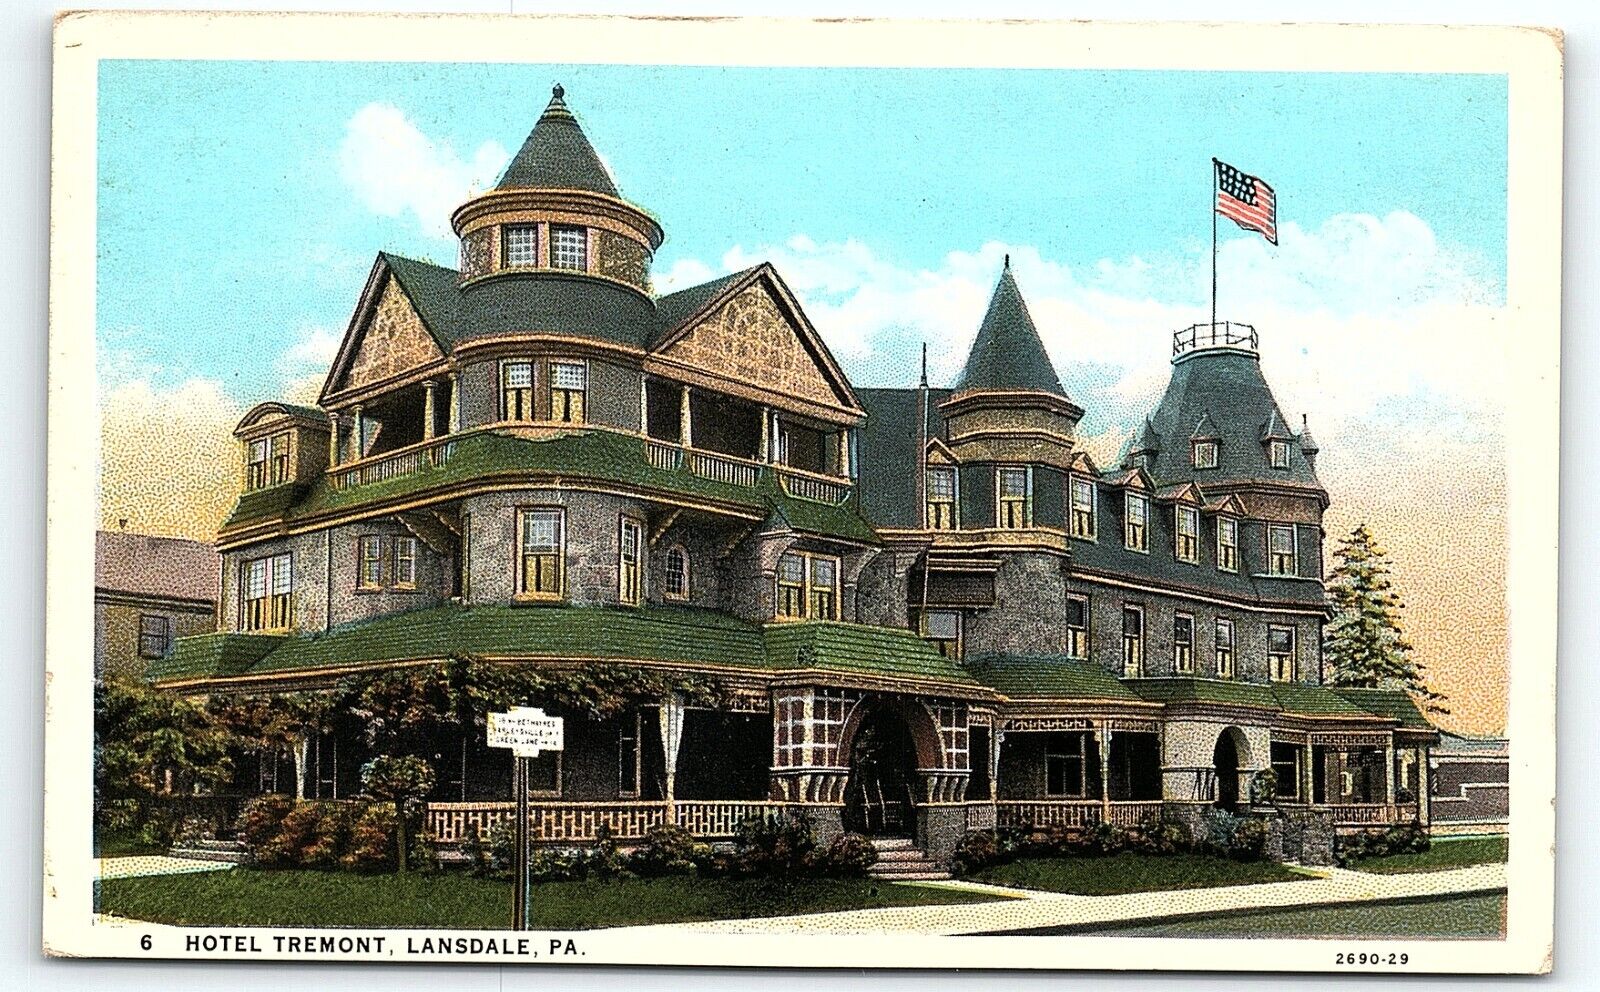 c1910 LANSDALE PA HOTEL TREMONT STREET VIEW UNPOSTED POSTCARD P3942